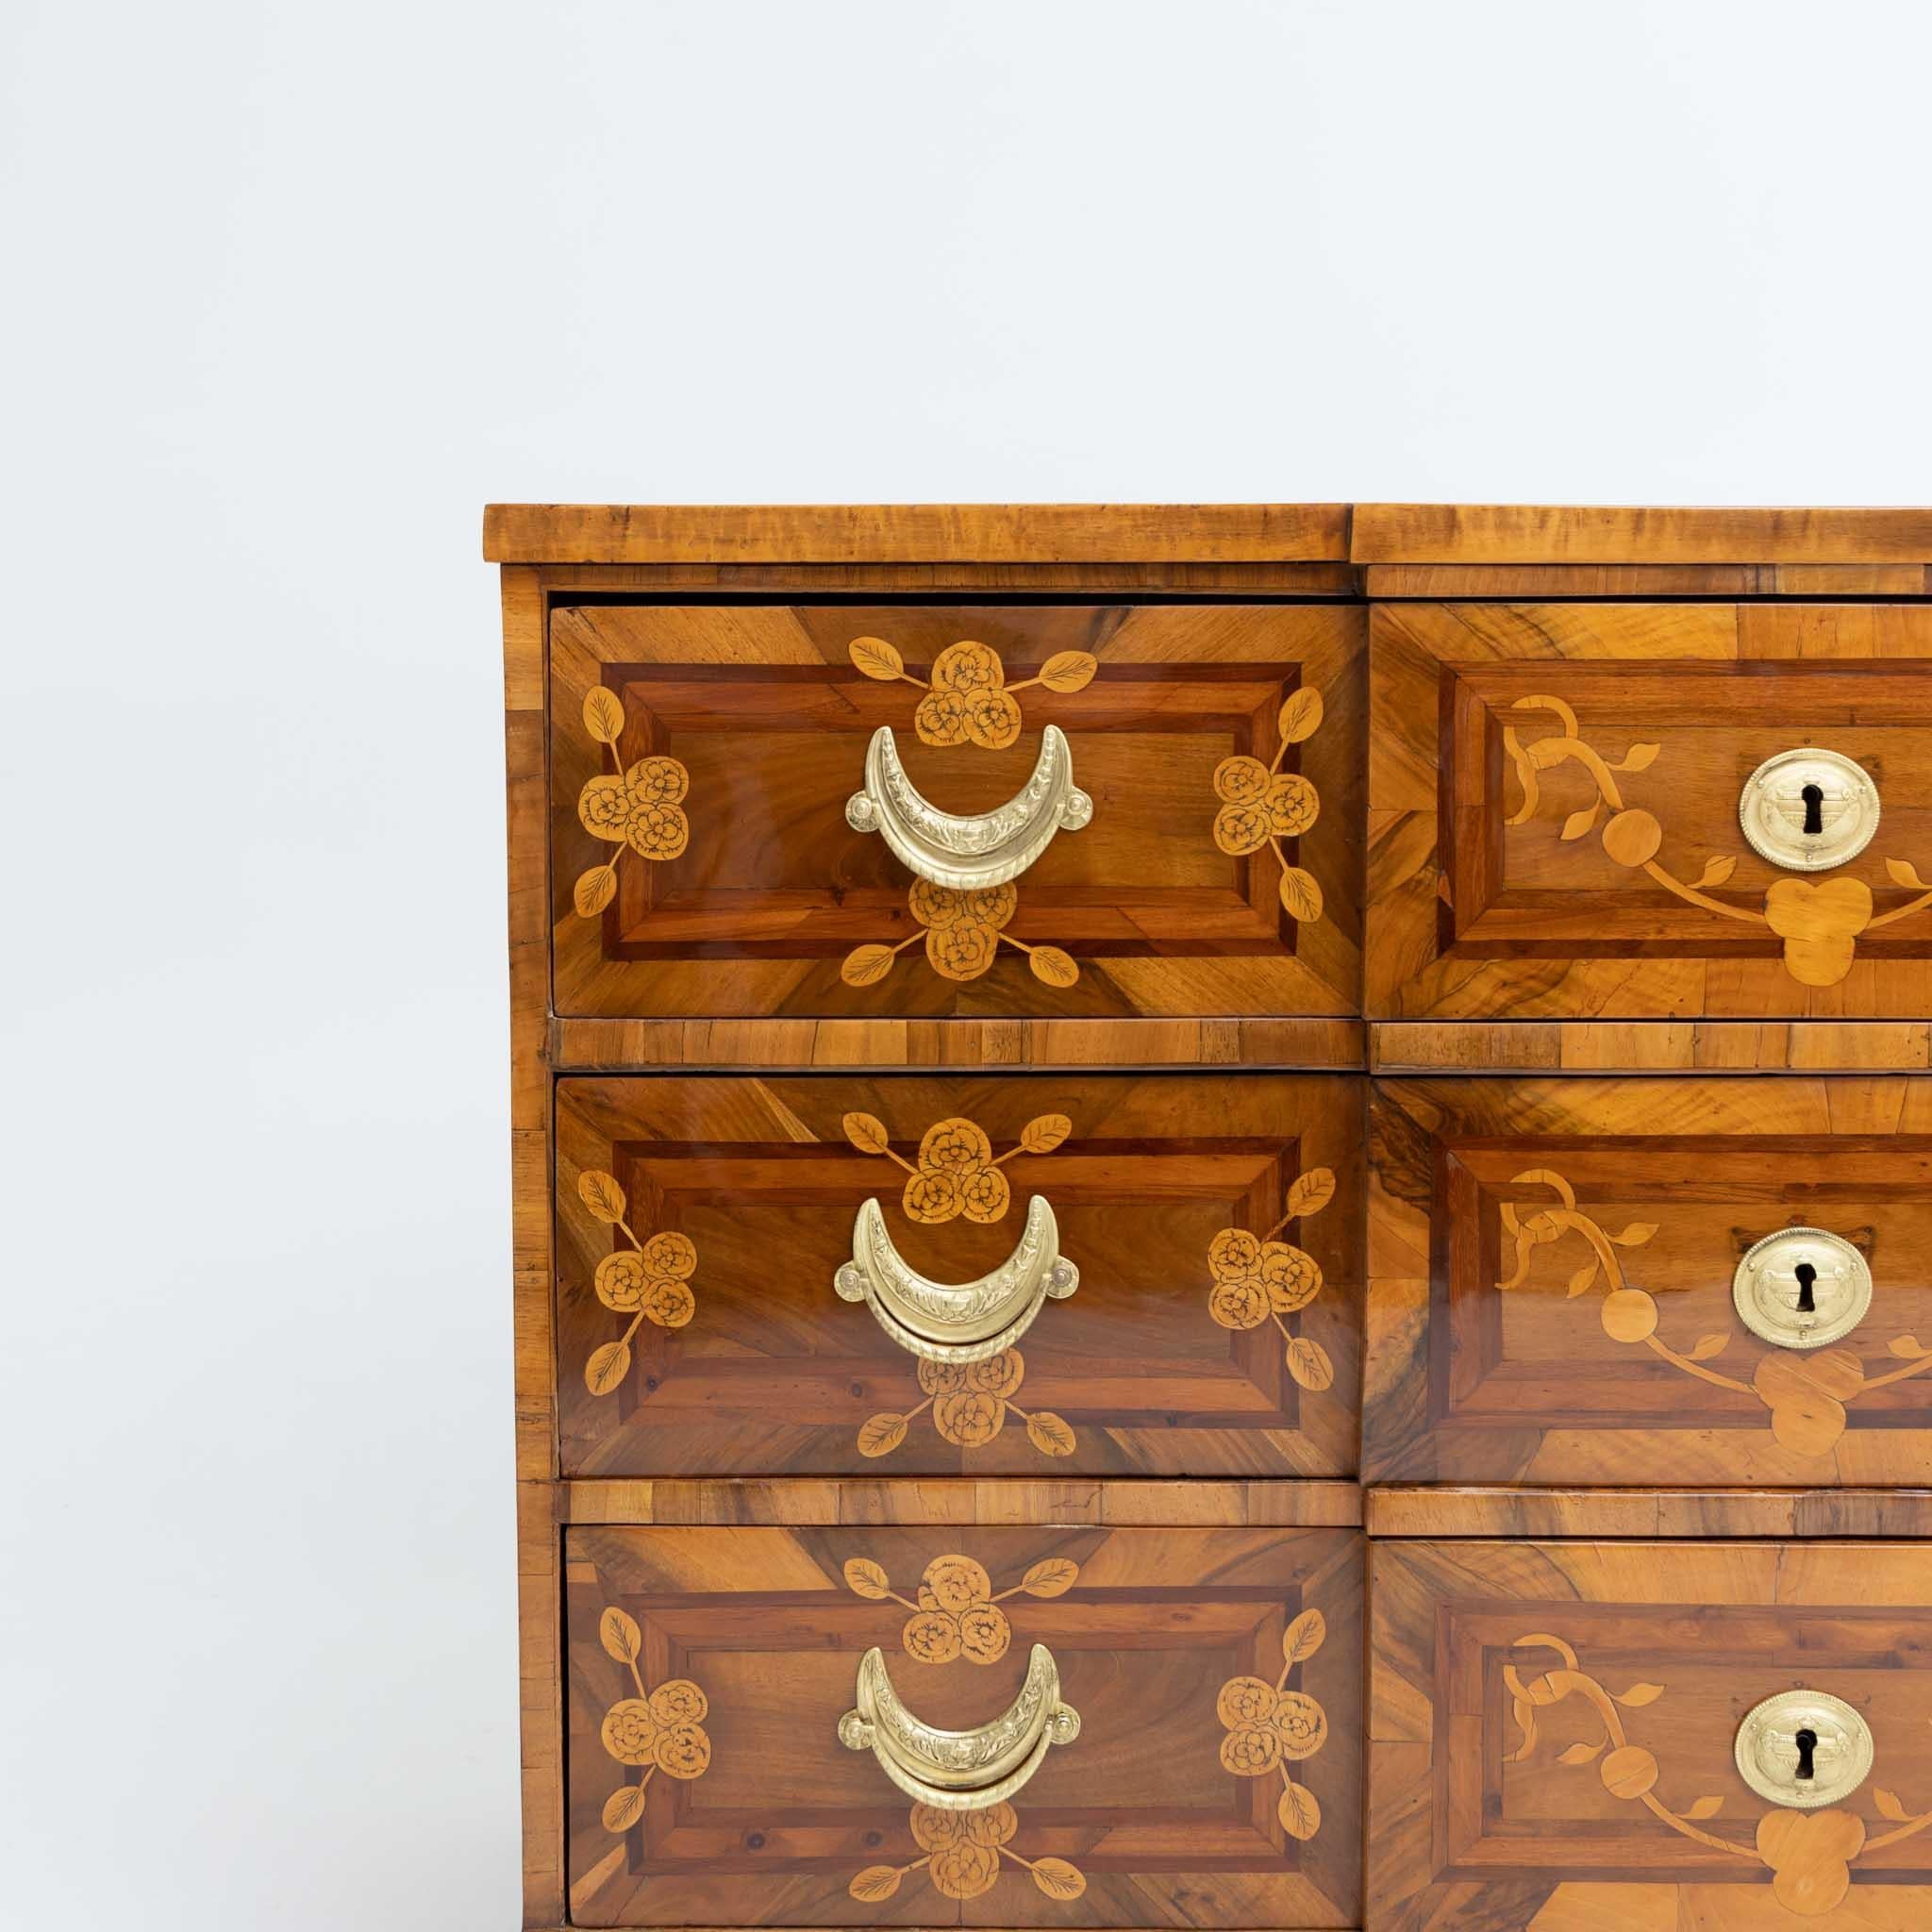 French Louis Seize Marquetry Chest of Drawers, Walnut veneered, Late 18th Century For Sale